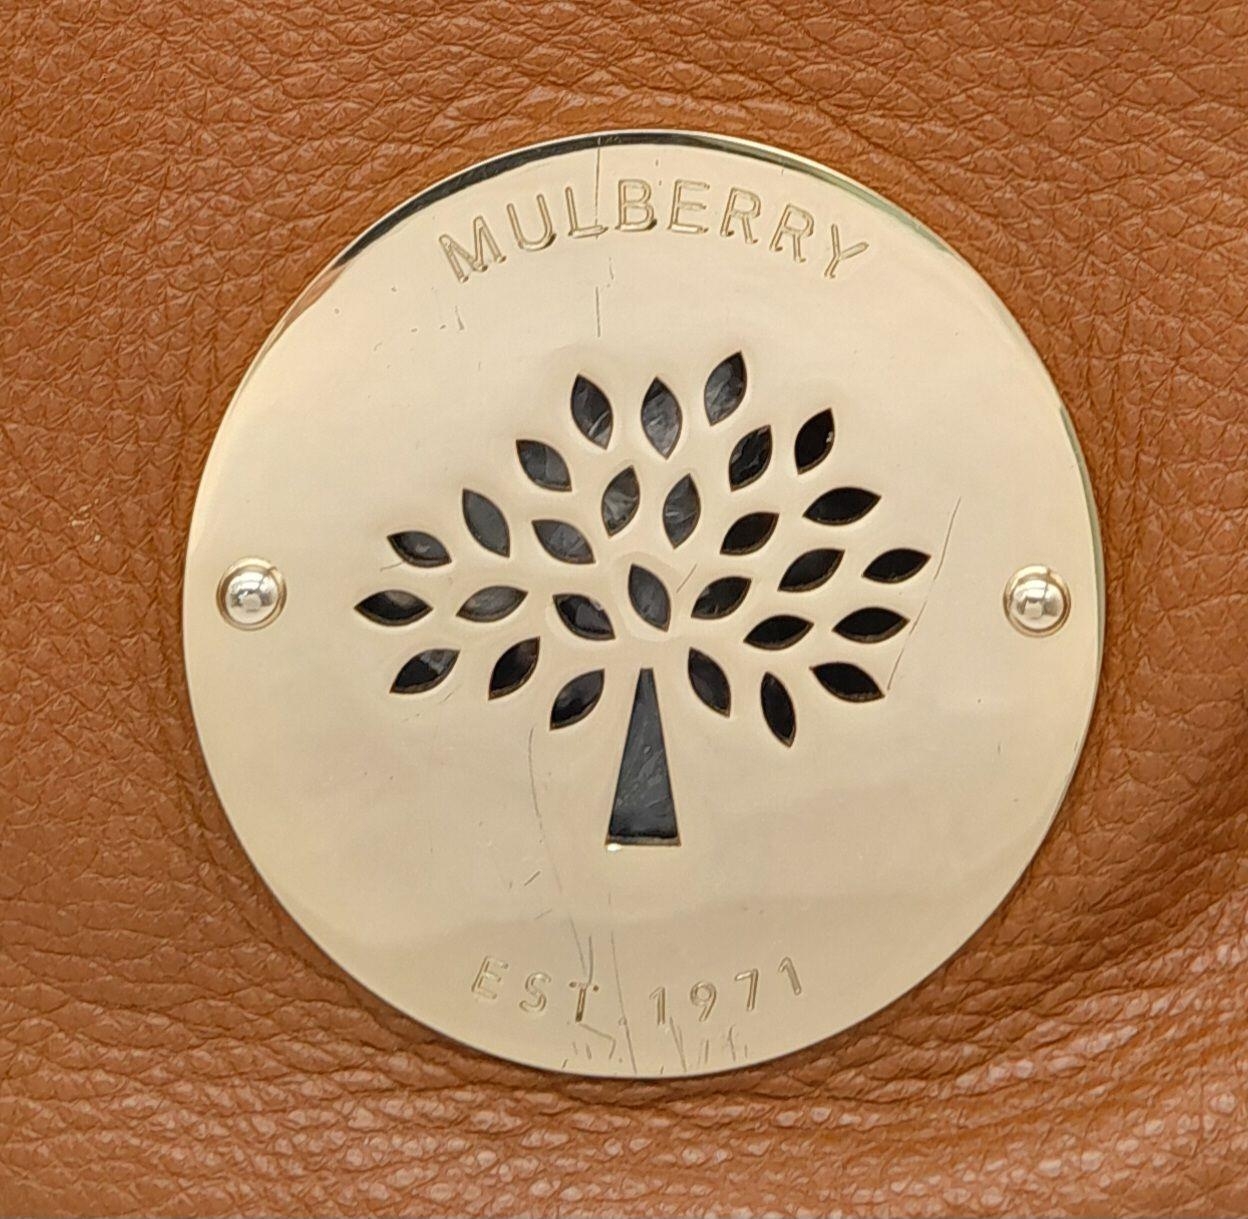 A Mulberry Tan Daria Hobo Bag. Leather exterior with gold-toned hardware, braided strap and zip - Image 6 of 8